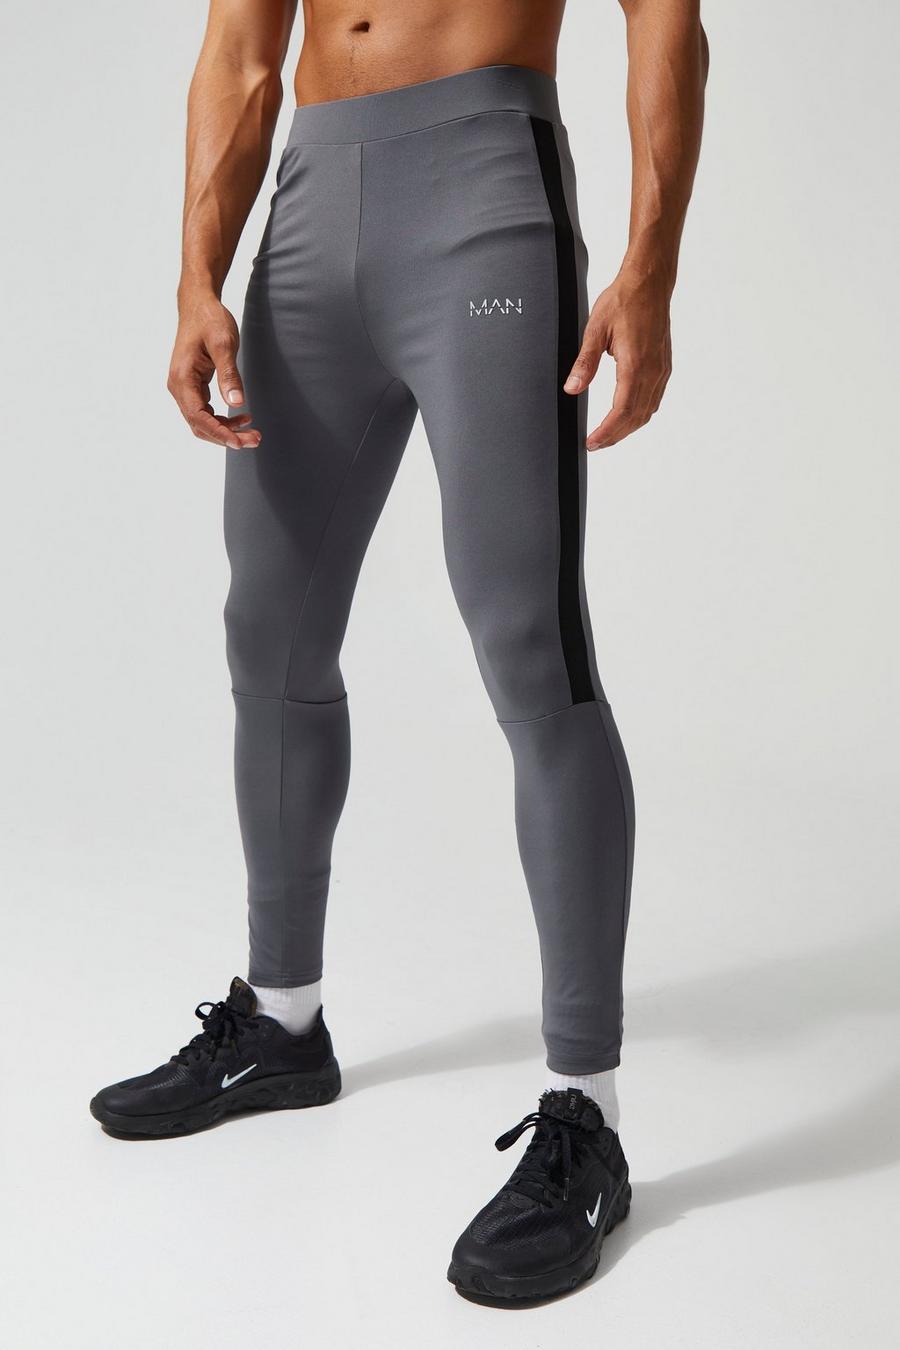 Charcoal grey Man Active Compression Training Tights